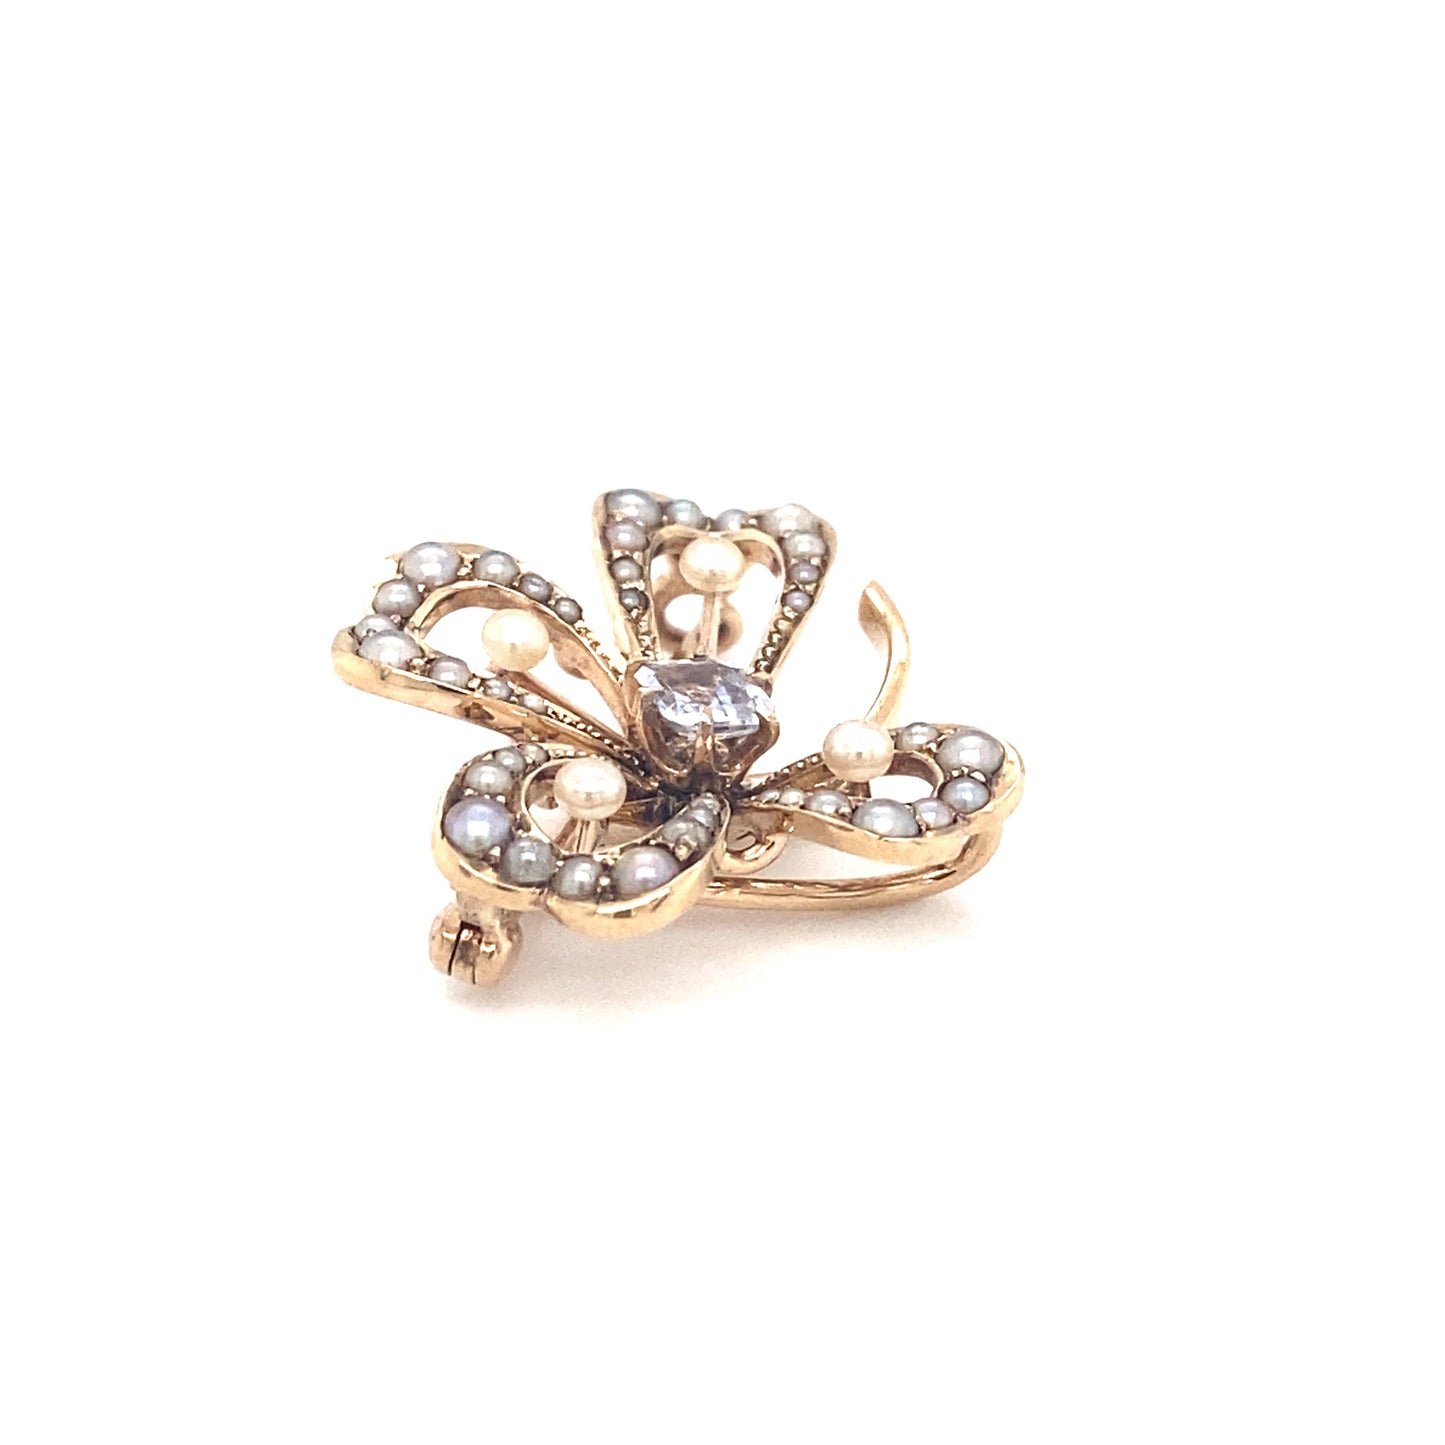 Circa 1890s Victorian Pearl and Ceylon Sapphire Clover Brooch in 14K Gold